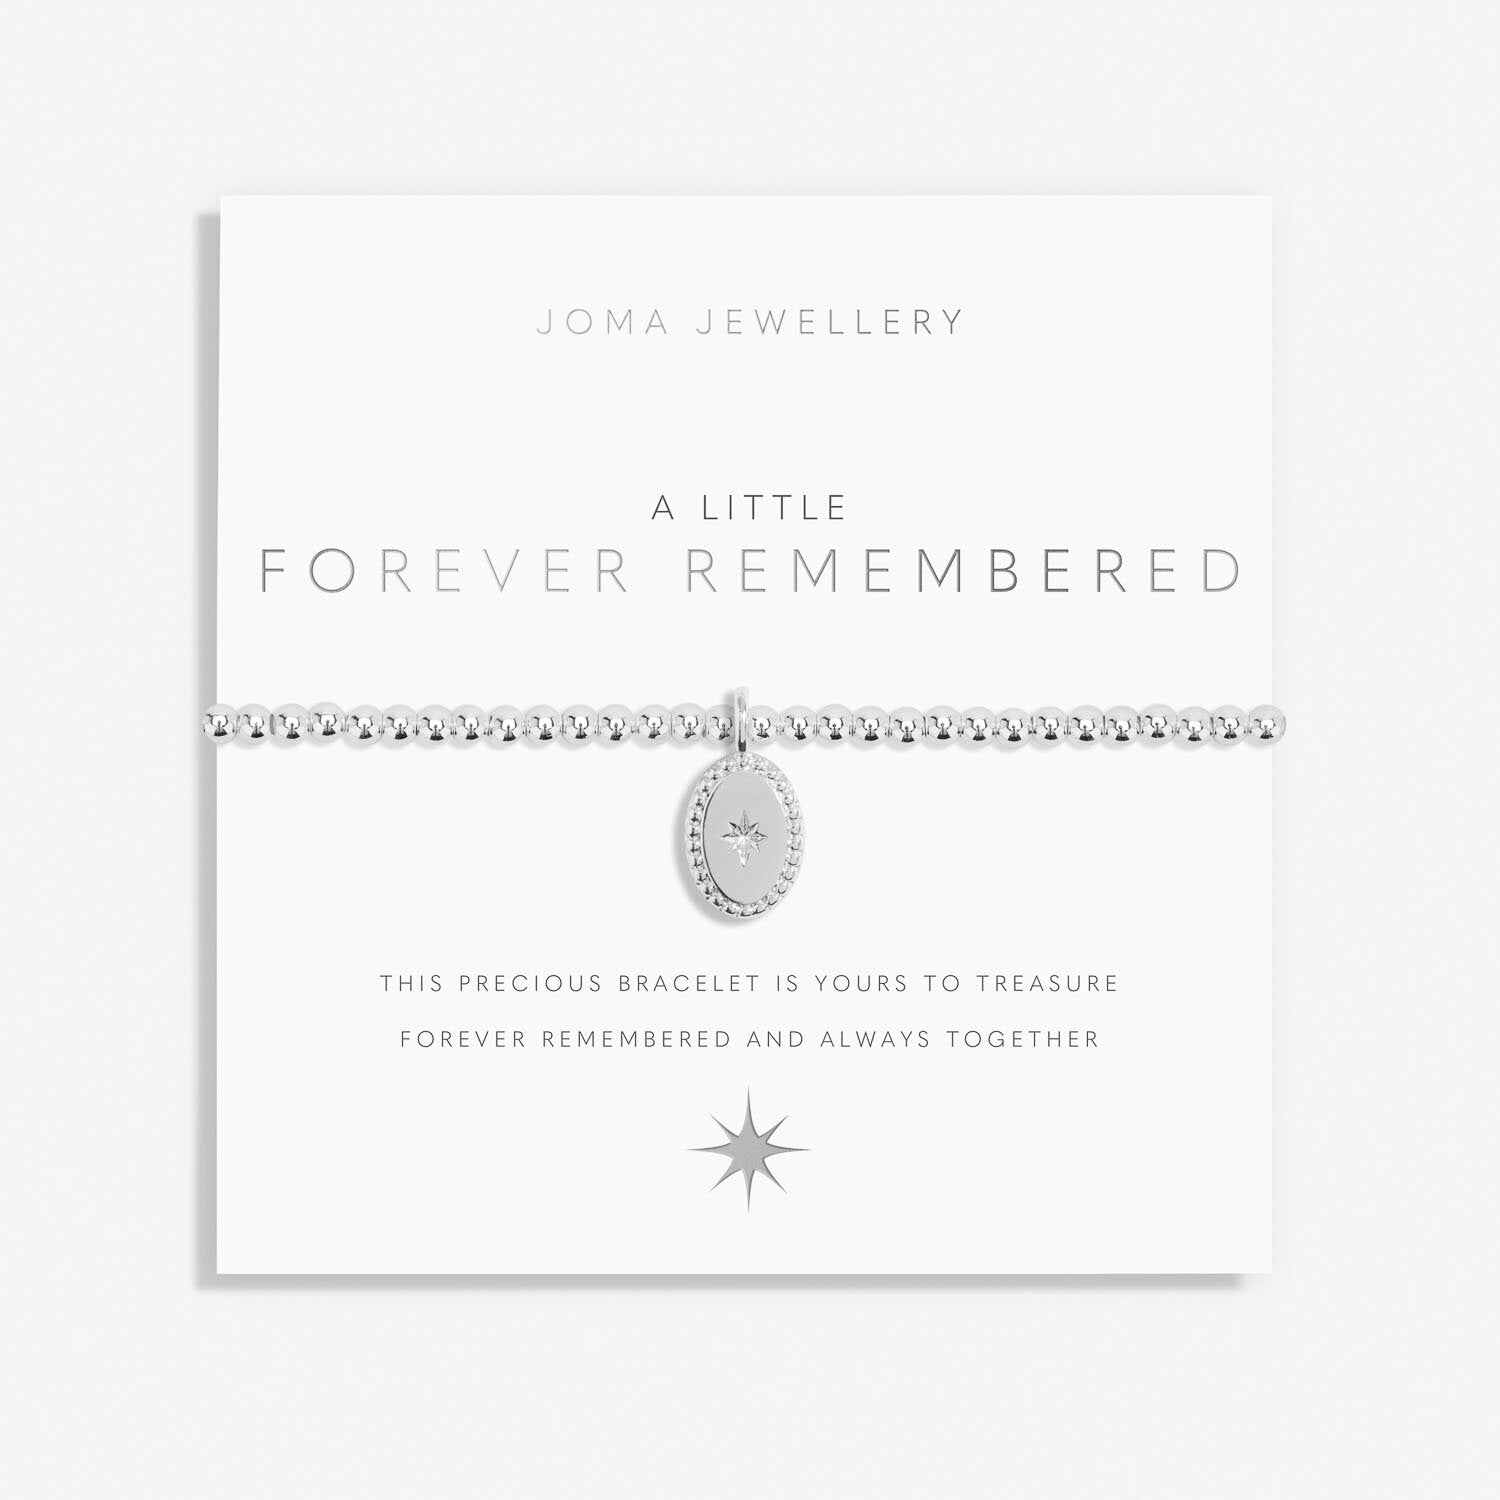 A Little 'Forever Remembered' Bracelet - Joma Jewellery